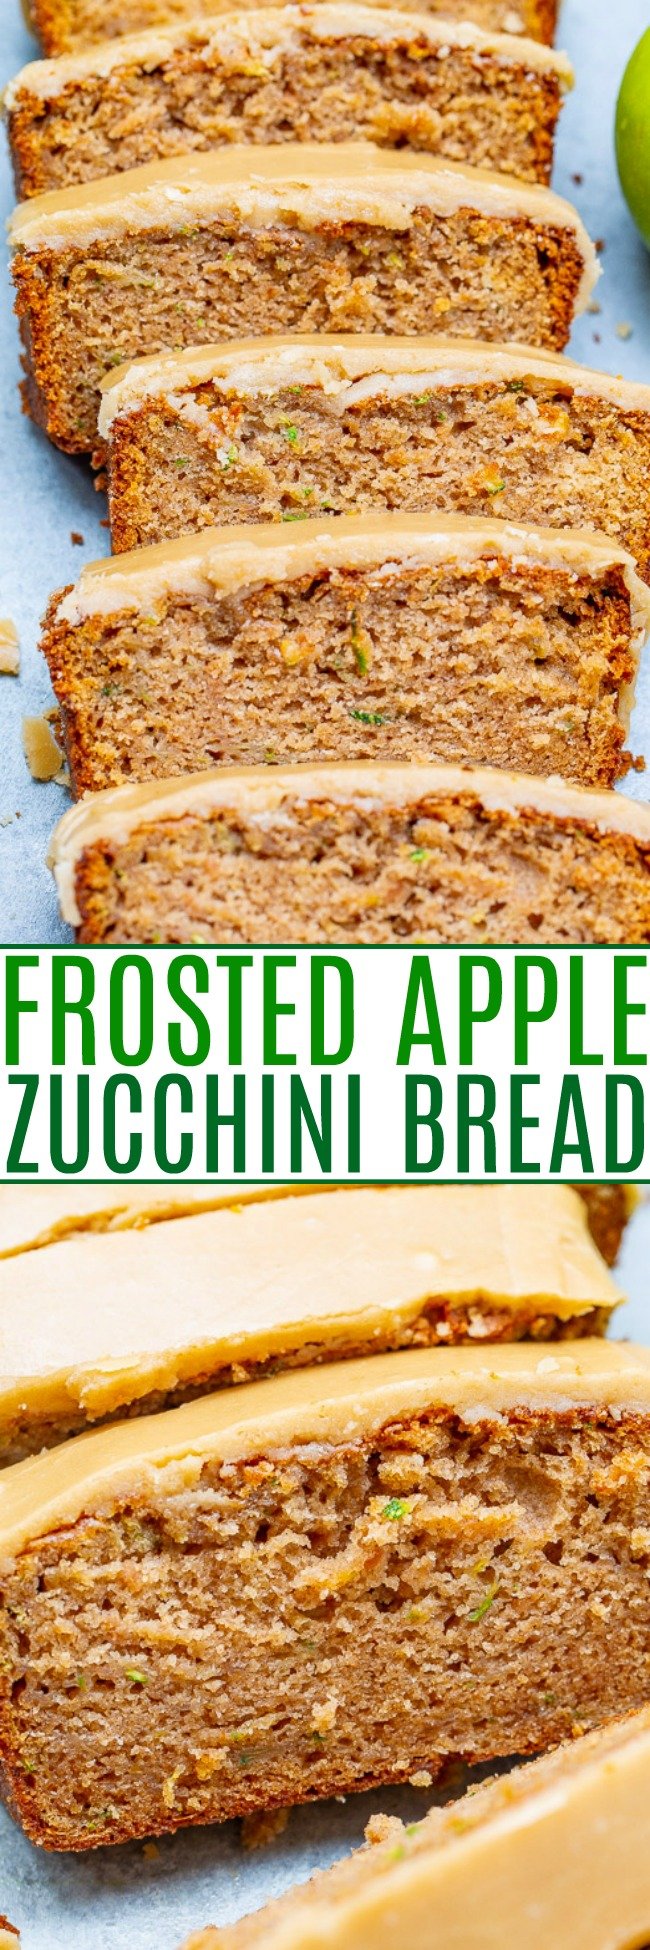 Apple Zucchini Bread with Brown Sugar Frosting -  Super soft, moist, and topped with the BEST frosting ever!!  One bowl, no mixer, EASY recipe for the best apple zucchini bread that everyone LOVES!!